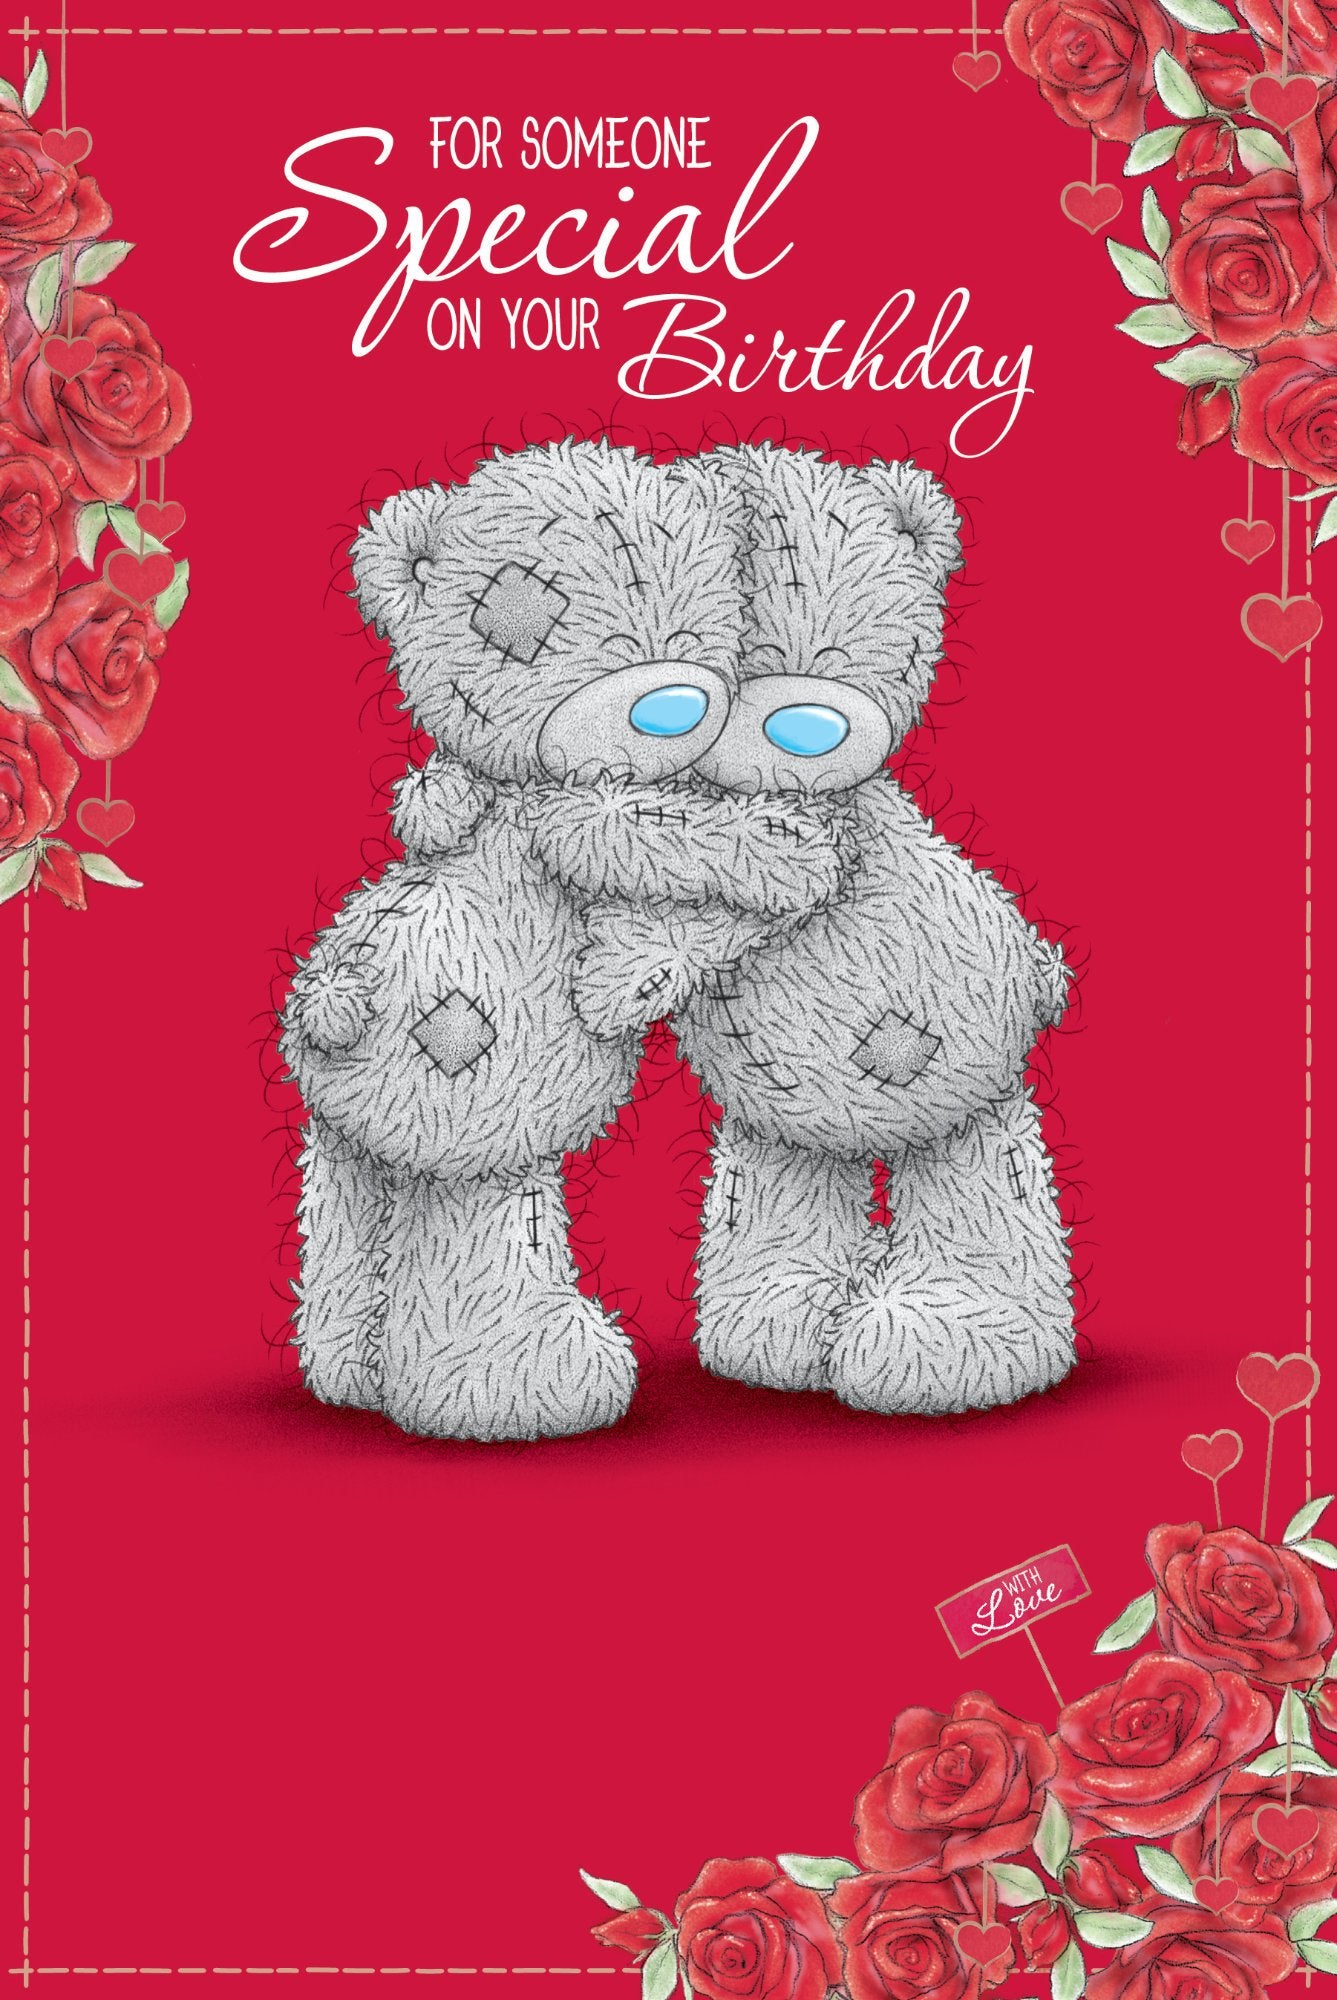 Photograph of Someone Special Love Birthday Teddies Greetings Card at Nicole's Shop